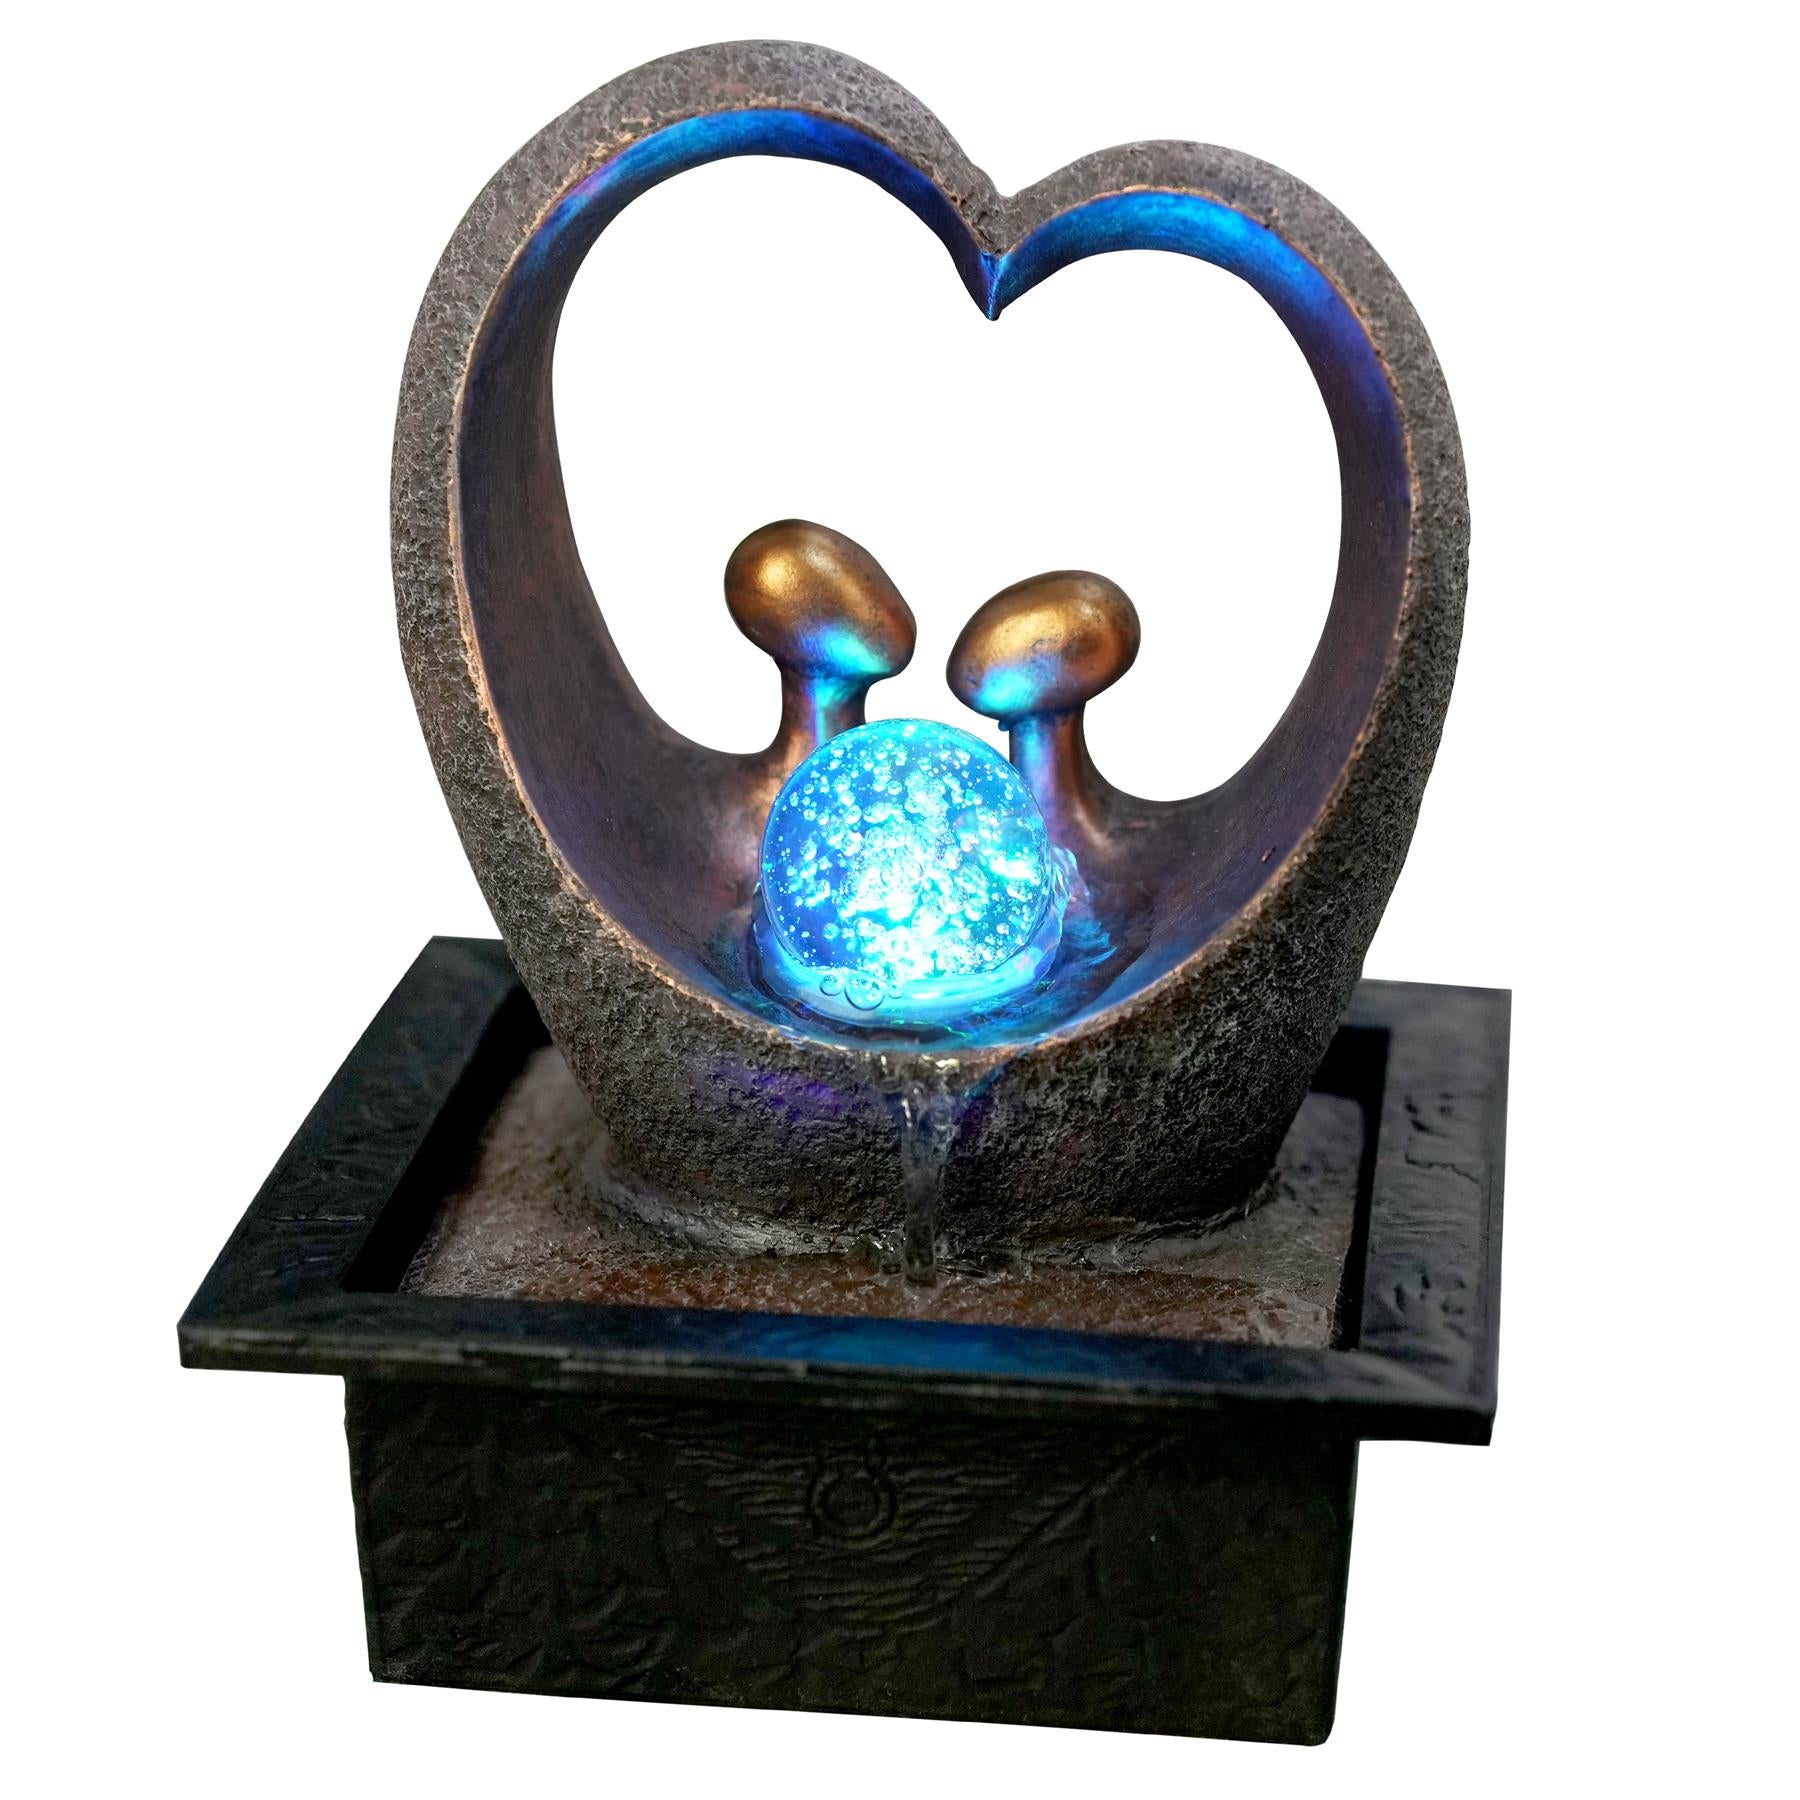 Heart Water Feature Led Lights by GEEZY - UKBuyZone